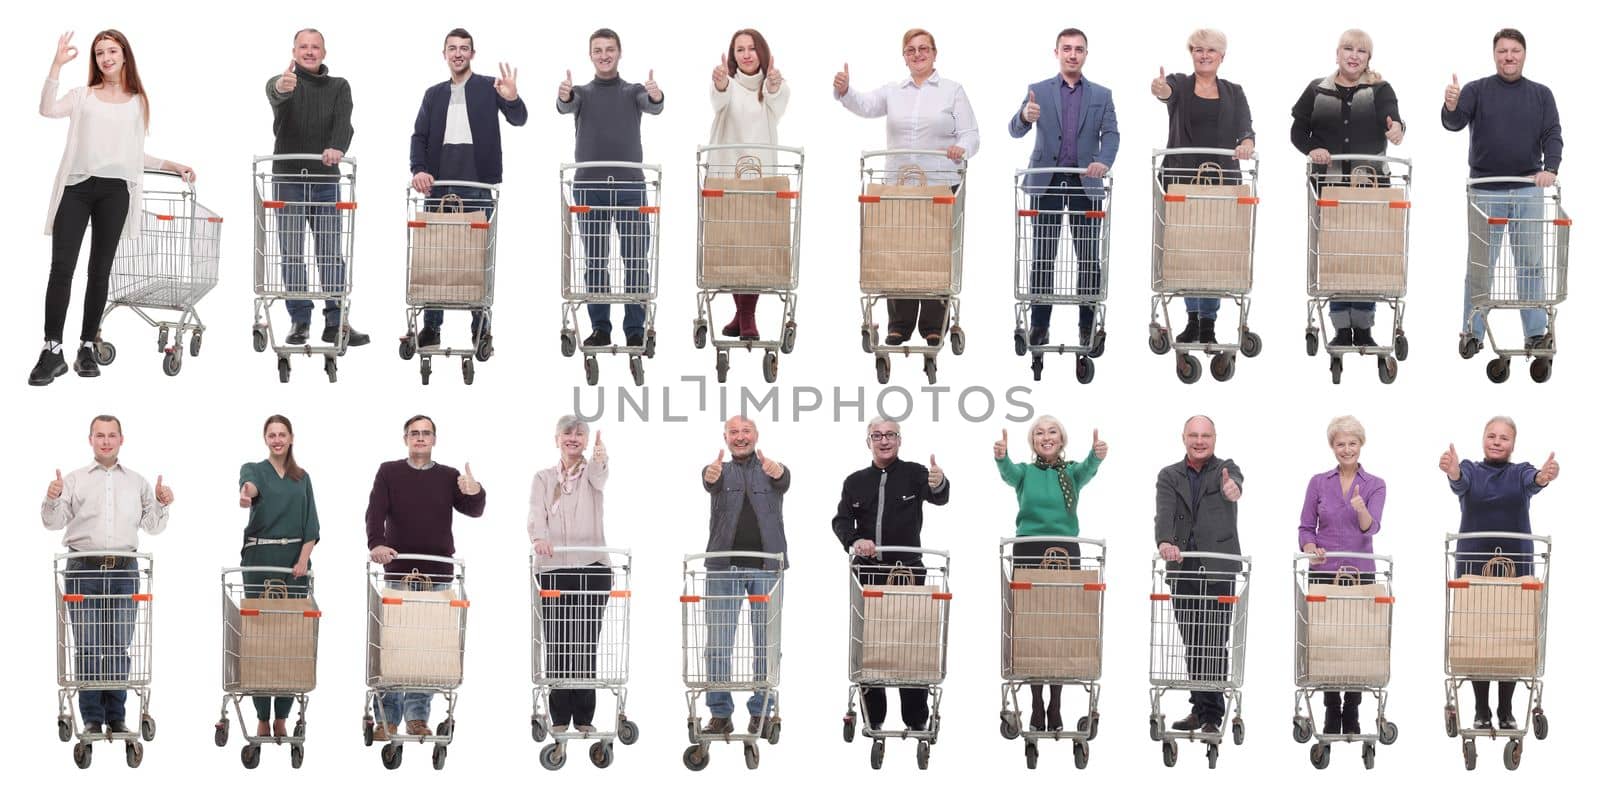 group of people with shopping cart showing thumbs up by asdf